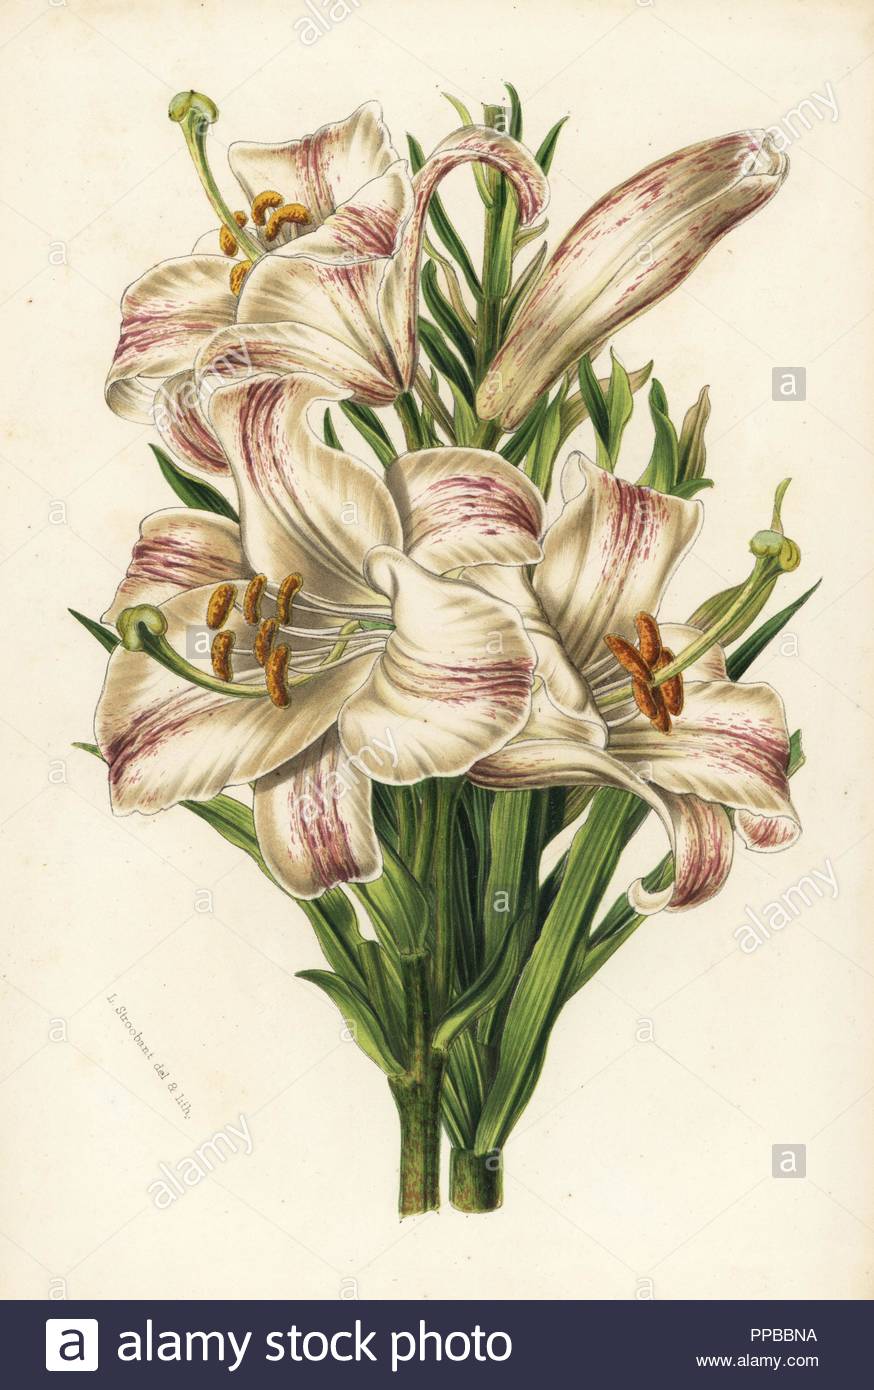 madonna lily lilium candidum flore striato handcoloured lithograph from louis van houtte and charles lemaires flowers of the gardens and hothouses of europe flore des serres et des jardins de leurope ghent belgium 1851 PPBBNA